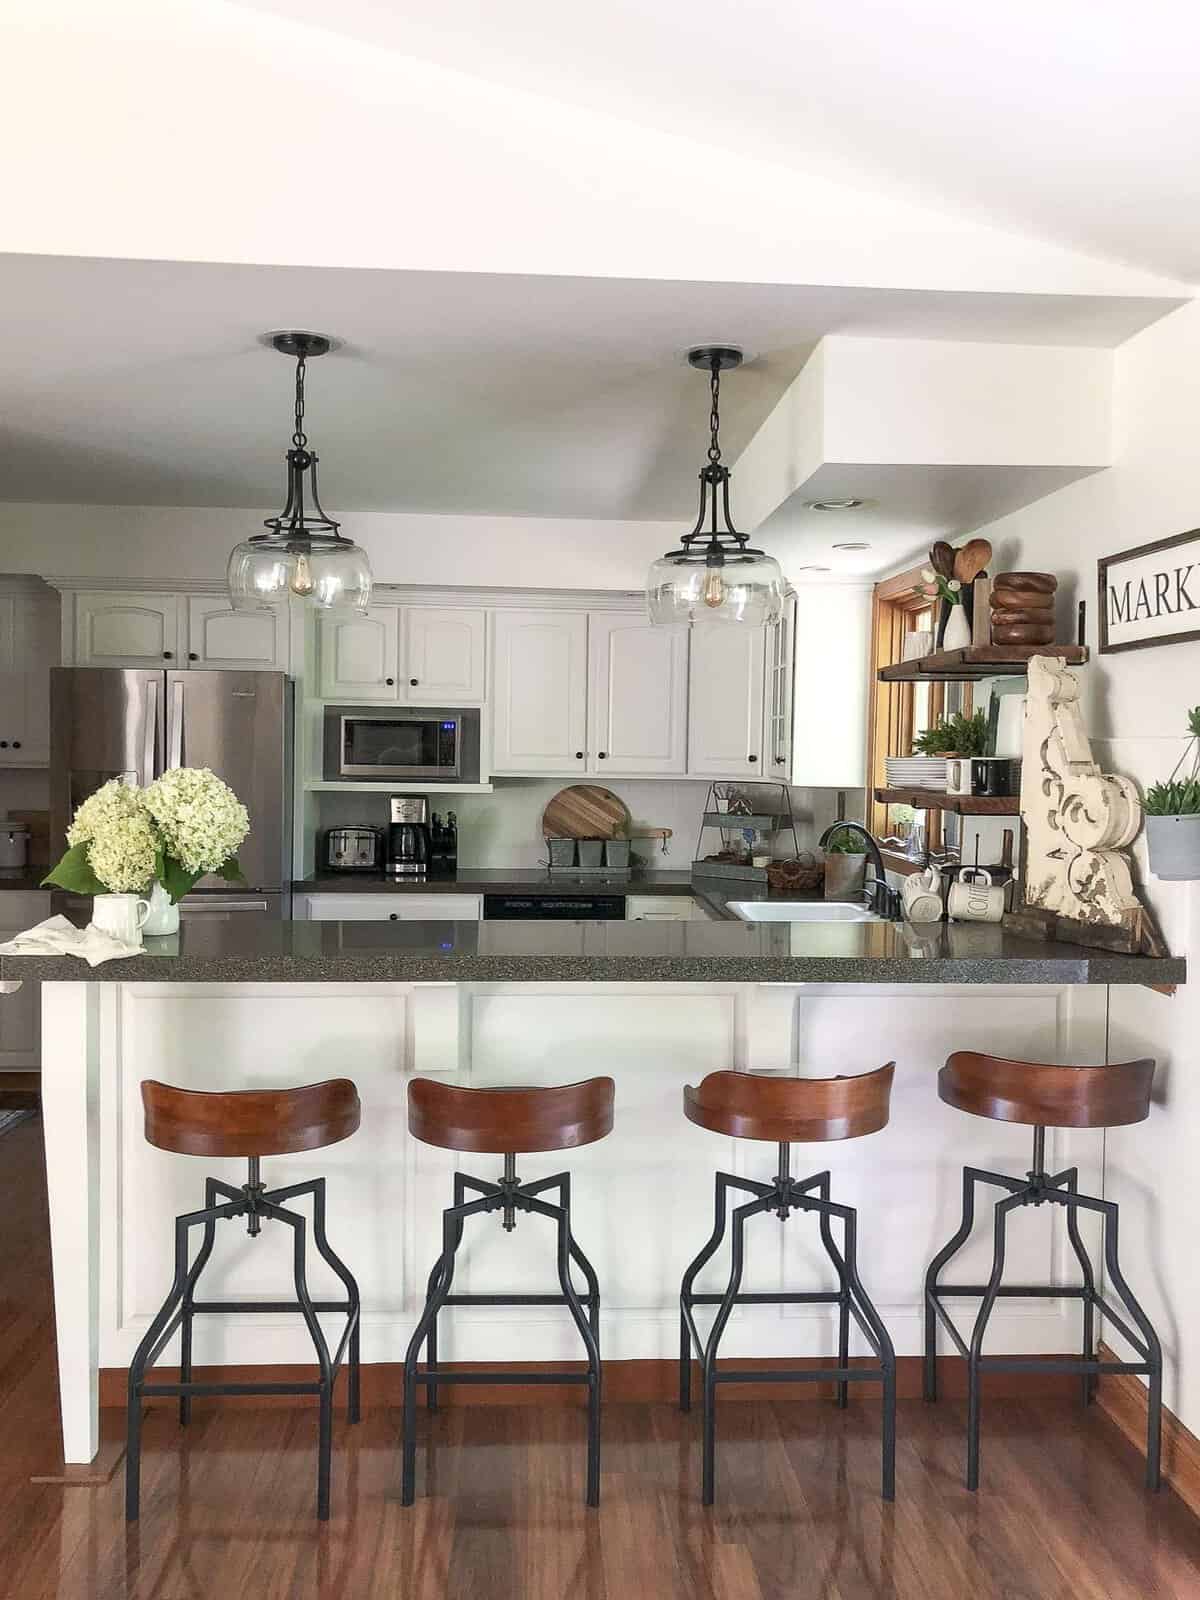 Kitchen Remodel on a Budget | The final reveal of our budget friendly kitchen remodel along with a DIY pendant makeover and beautiful kitchen decor ideas.